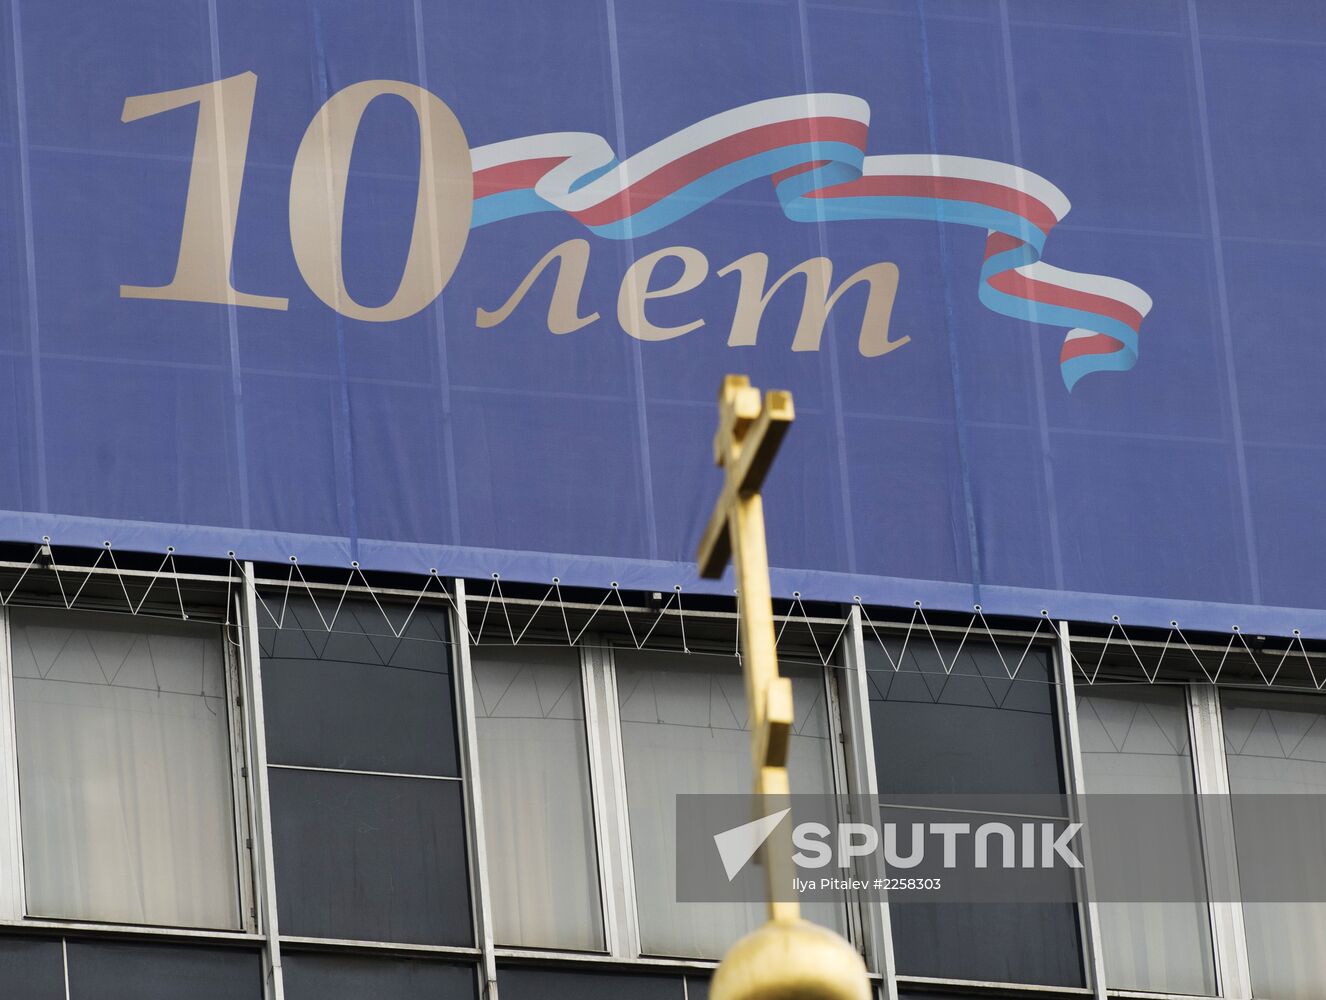 Banner with Russian flag colors reversed on FSKN building